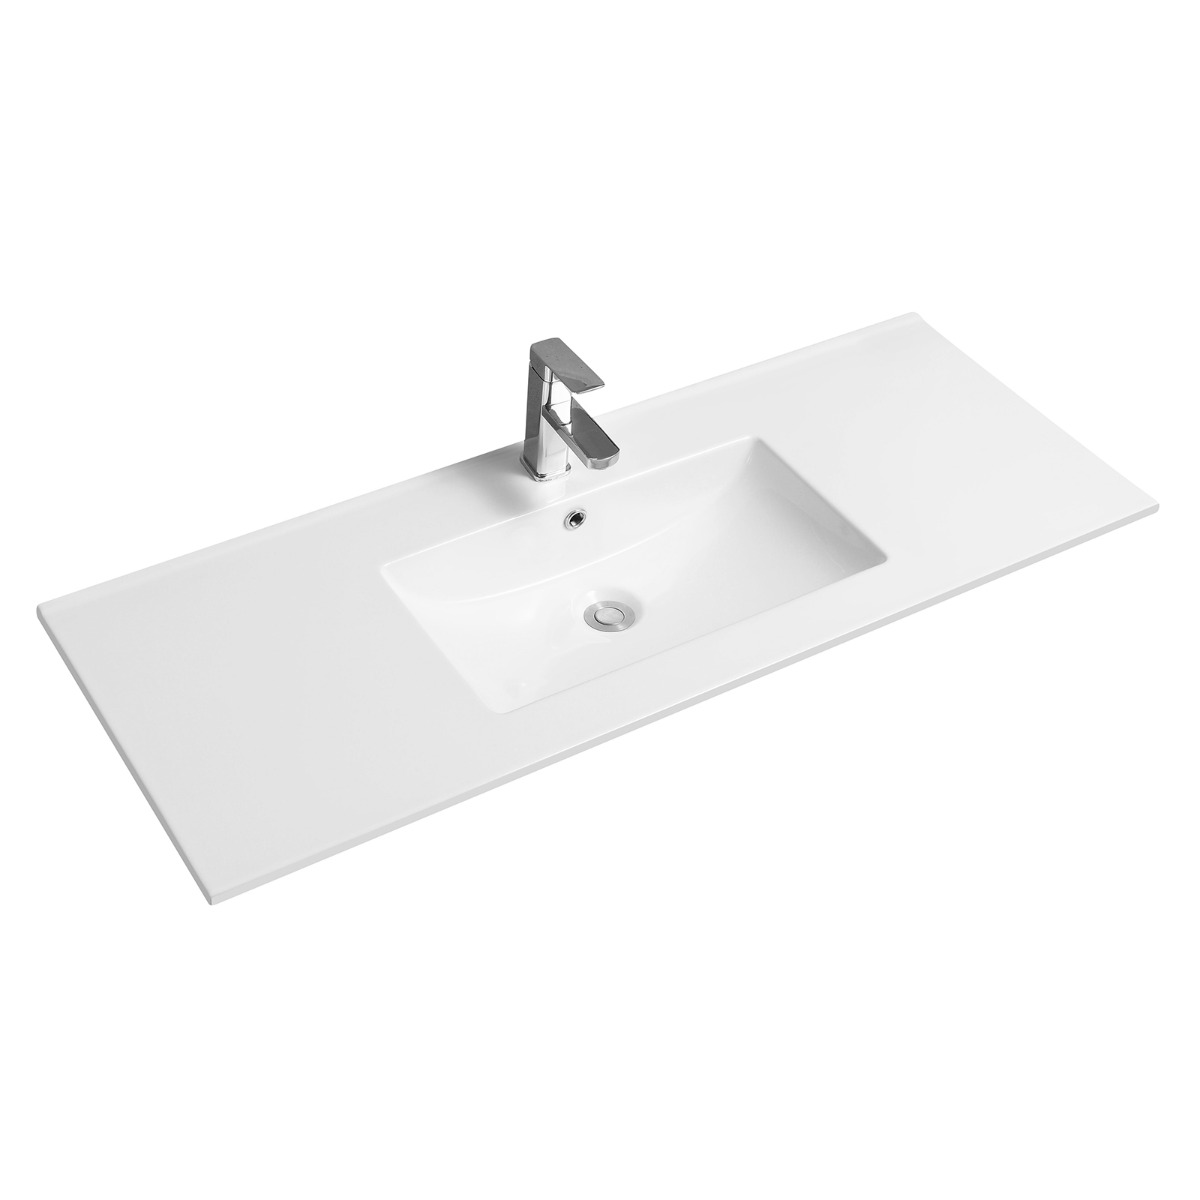 4001A Ceramic 121cm Thin-Edge Inset Basin with Scooped Bowl